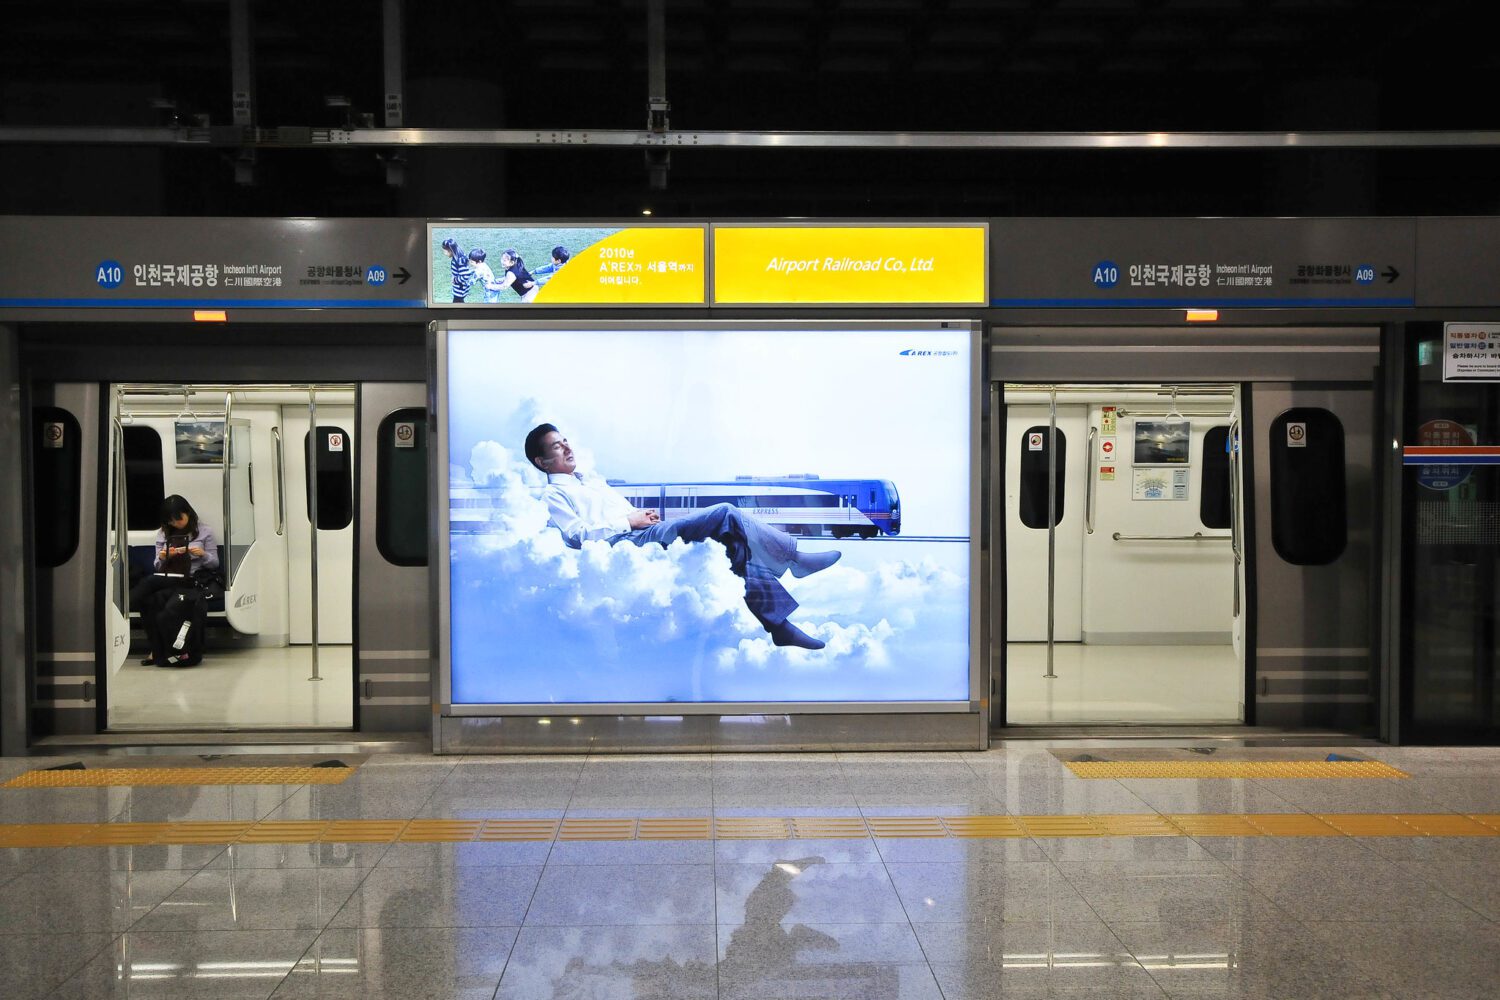 incheon airport to myeongdong | AREX all stop train